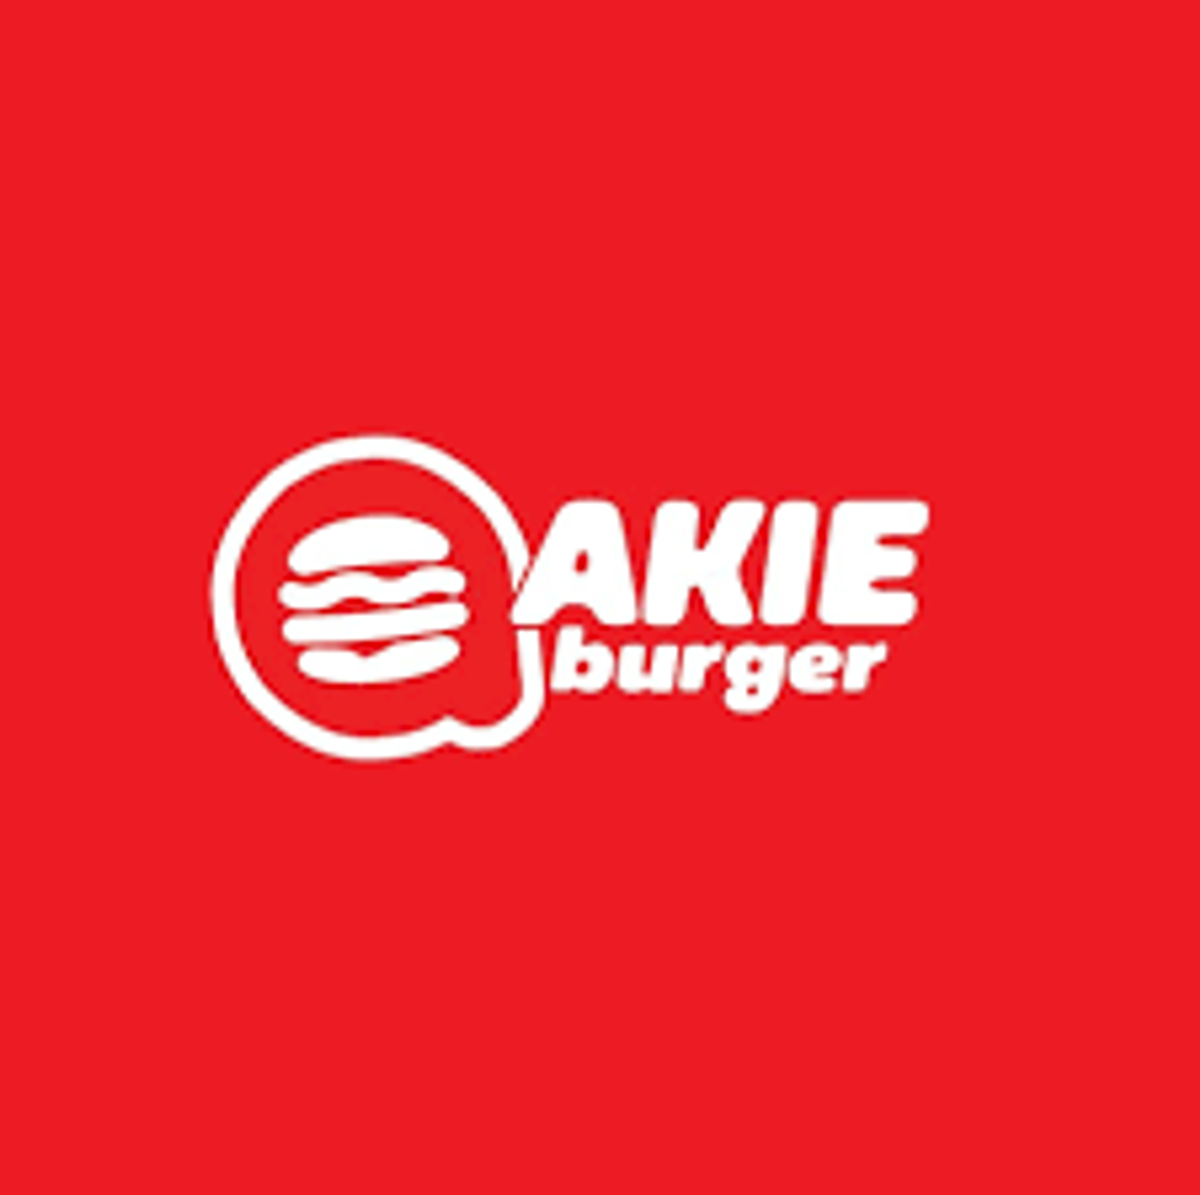 Customized Stainless Burger Stall with AKIE Burger Malaysia